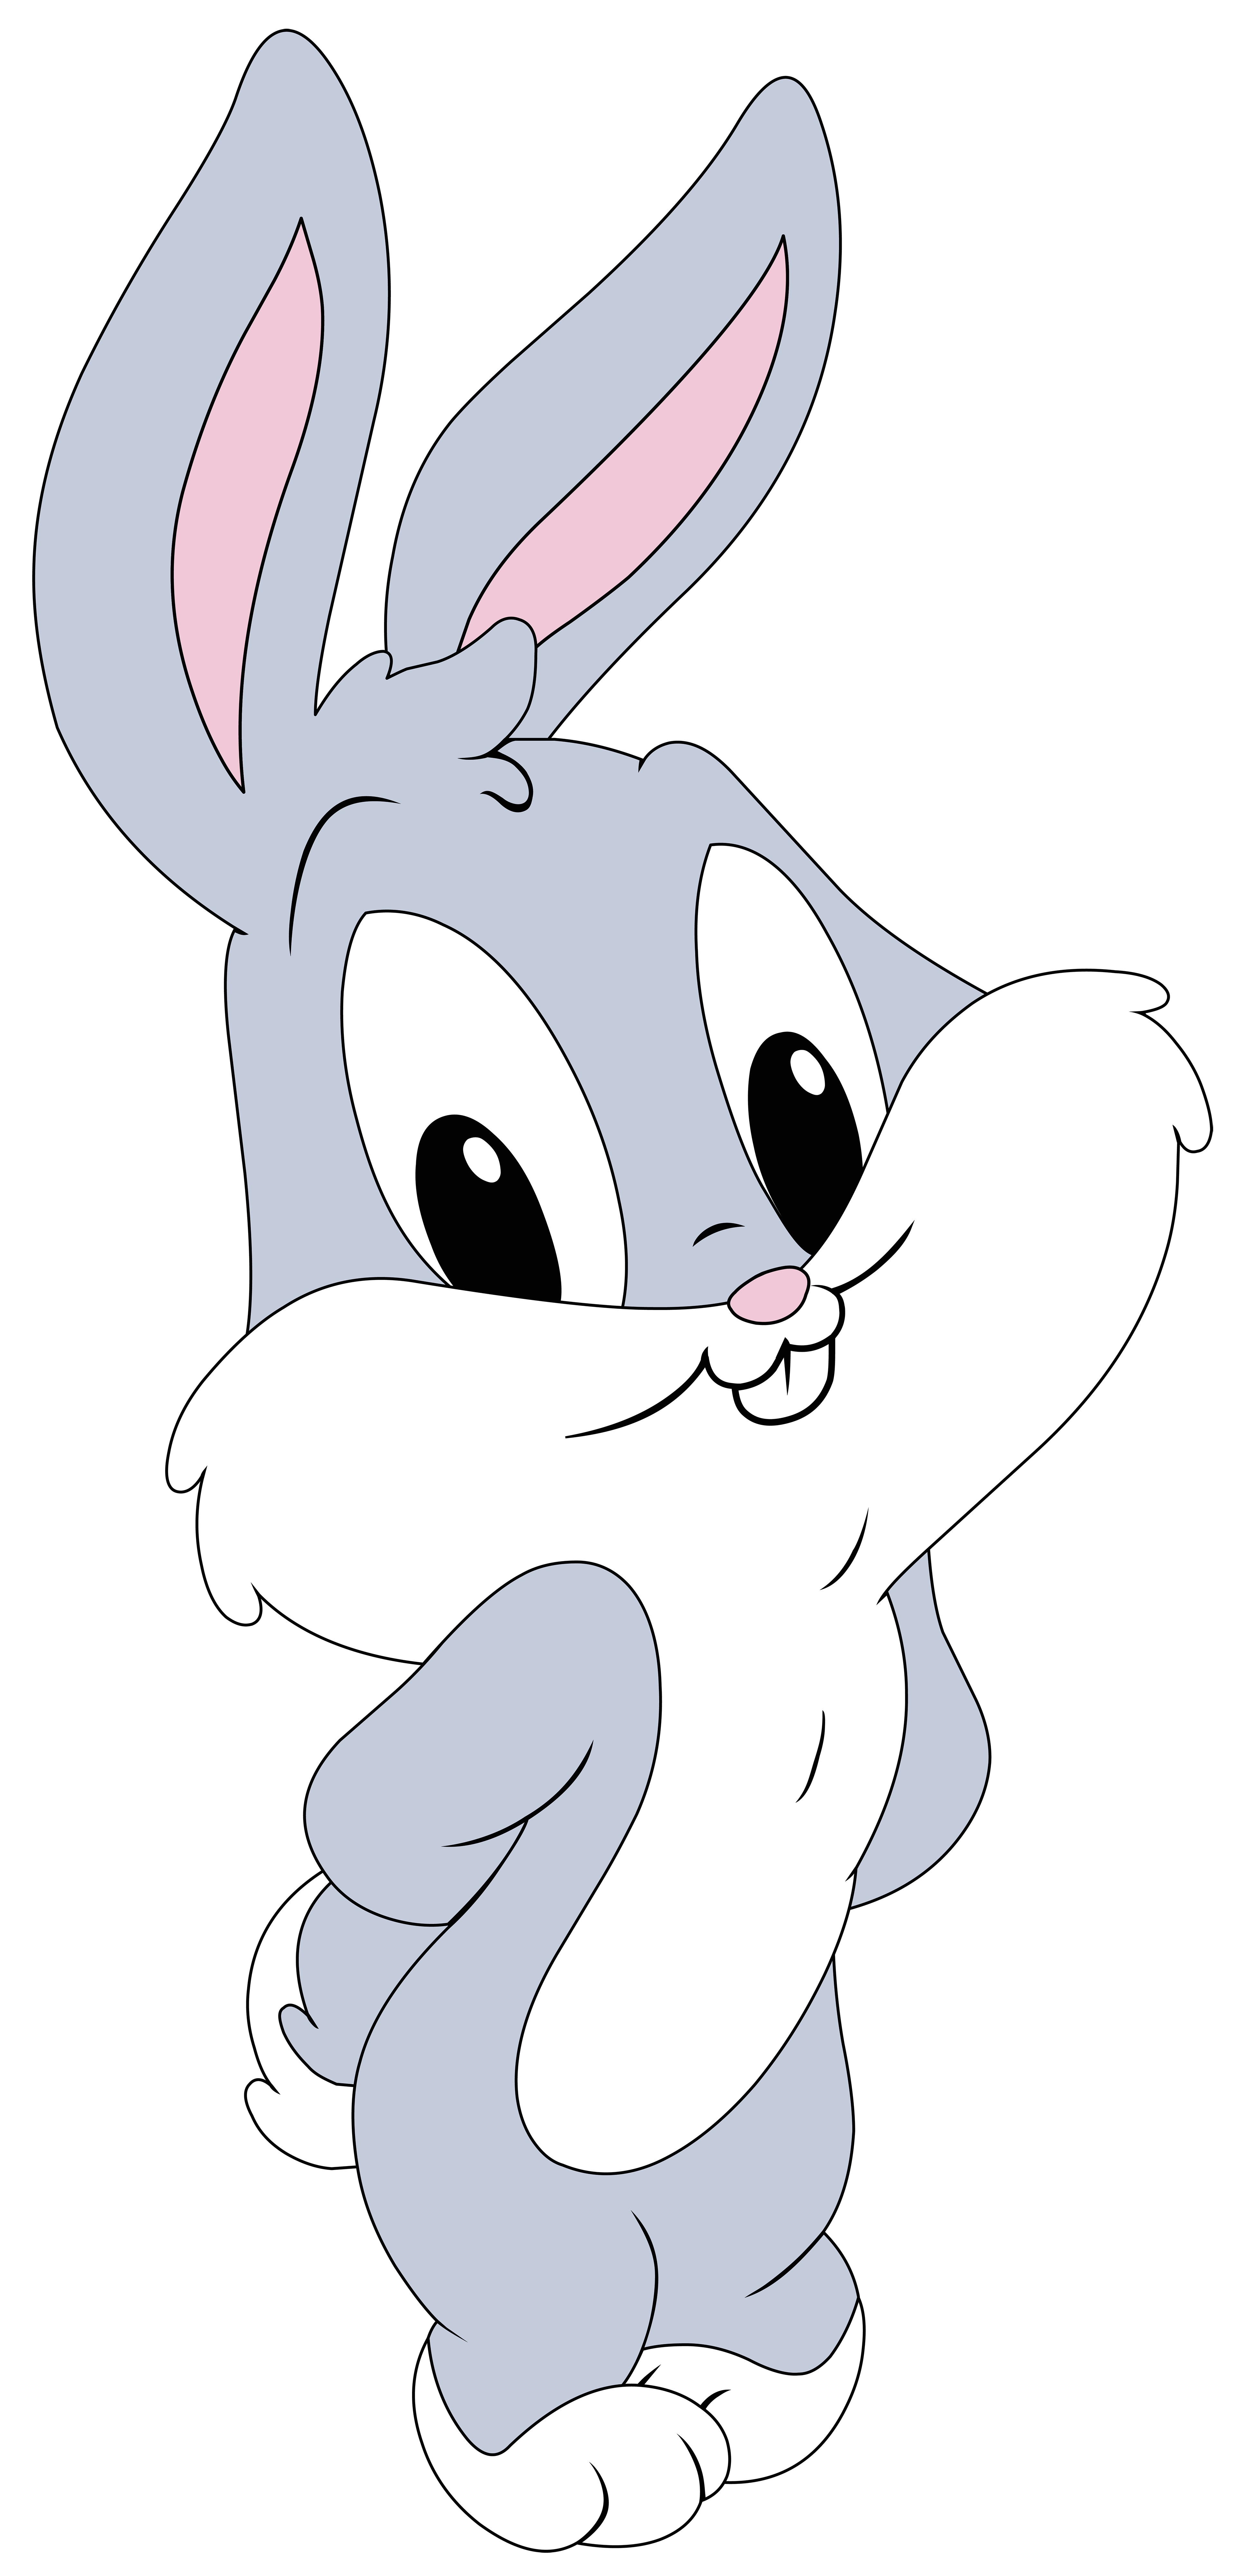 Bugs Bunny Baby Transparent PNG Clip Art Image Quality Image And Transparent PNG Free Clipart